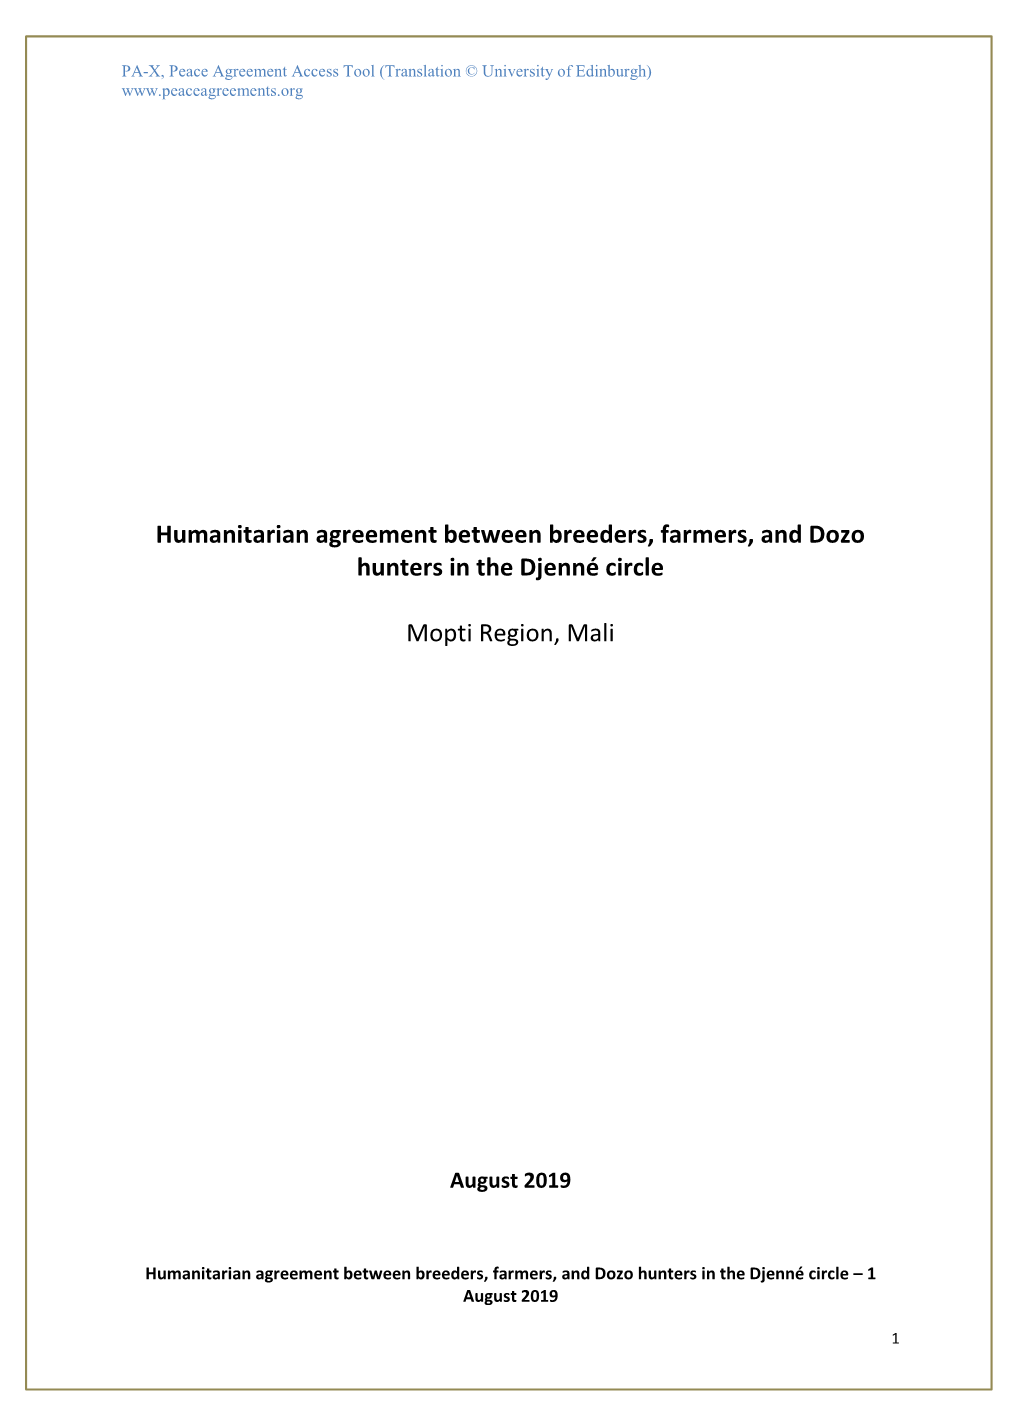 Humanitarian Agreement Between Breeders, Farmers, and Dozo Hunters in the Djenné Circle